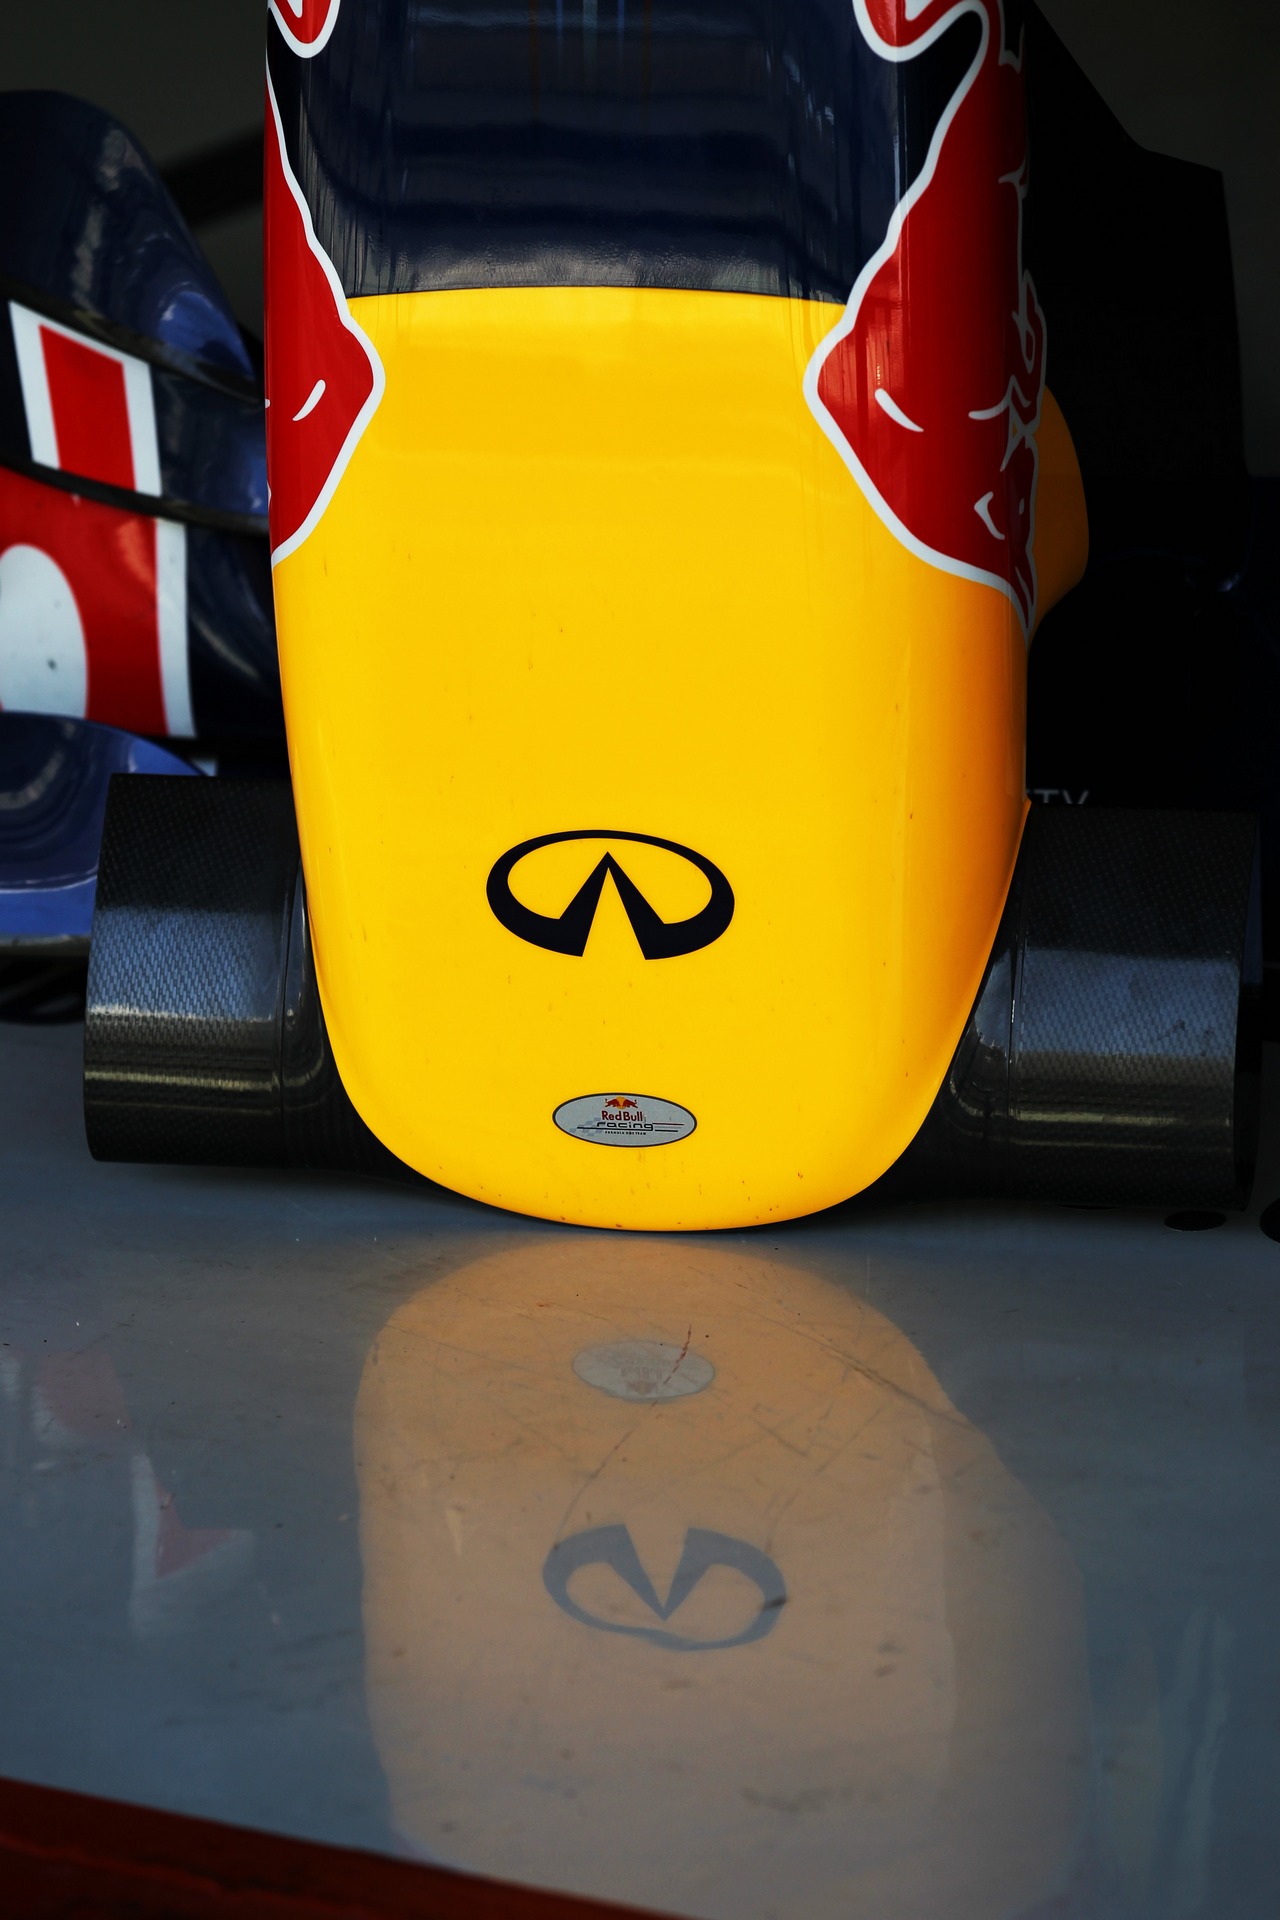 Red Bull Racing RB8 nosecone.
07.11.2012. Formula 1 Young Drivers Test, Day 2, Yas Marina Circuit, Abu Dhabi, UAE.
